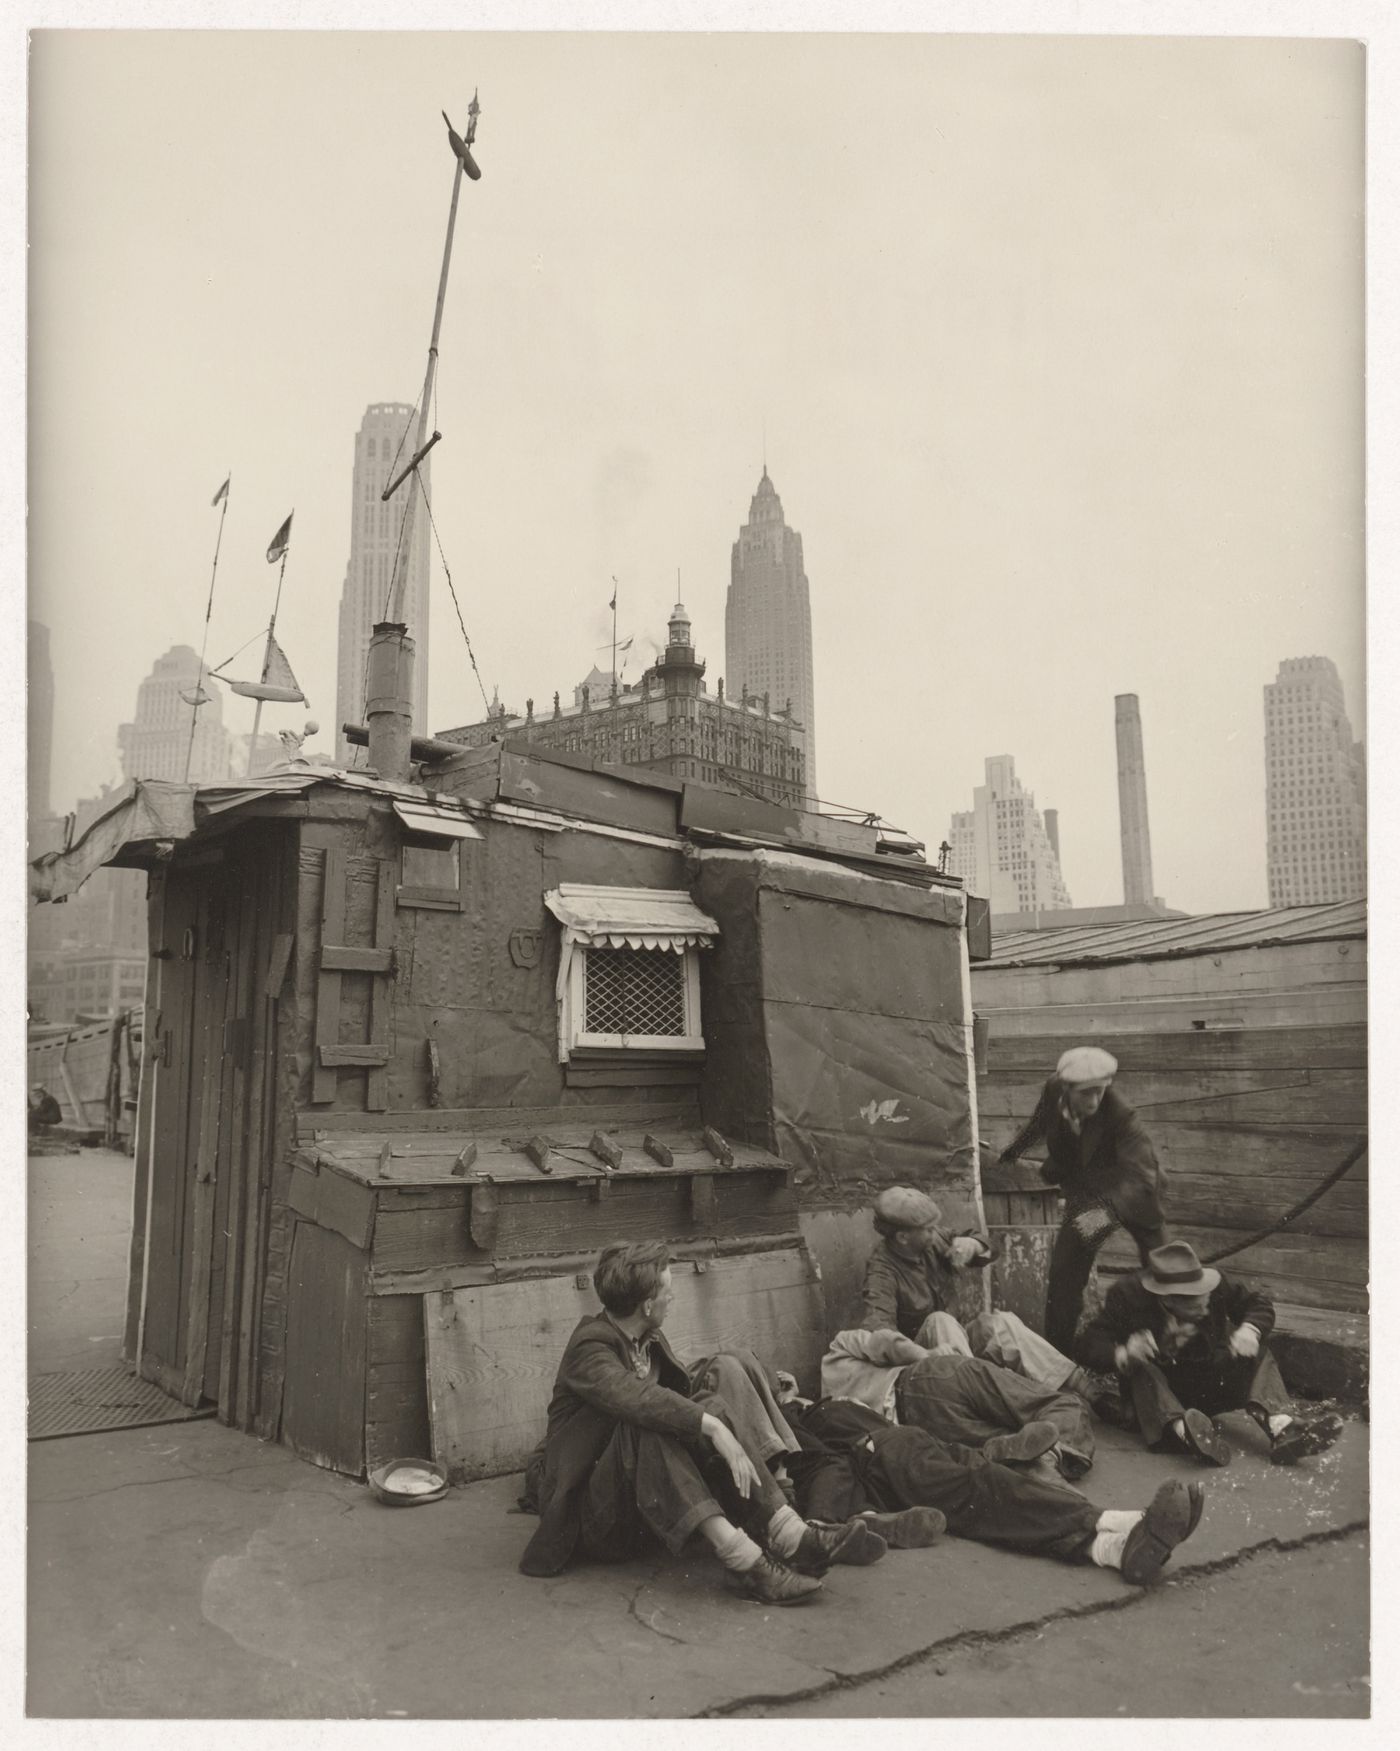 Shelter on the Waterfront, Coenties Slip, Pier 5, East River, Manhattan